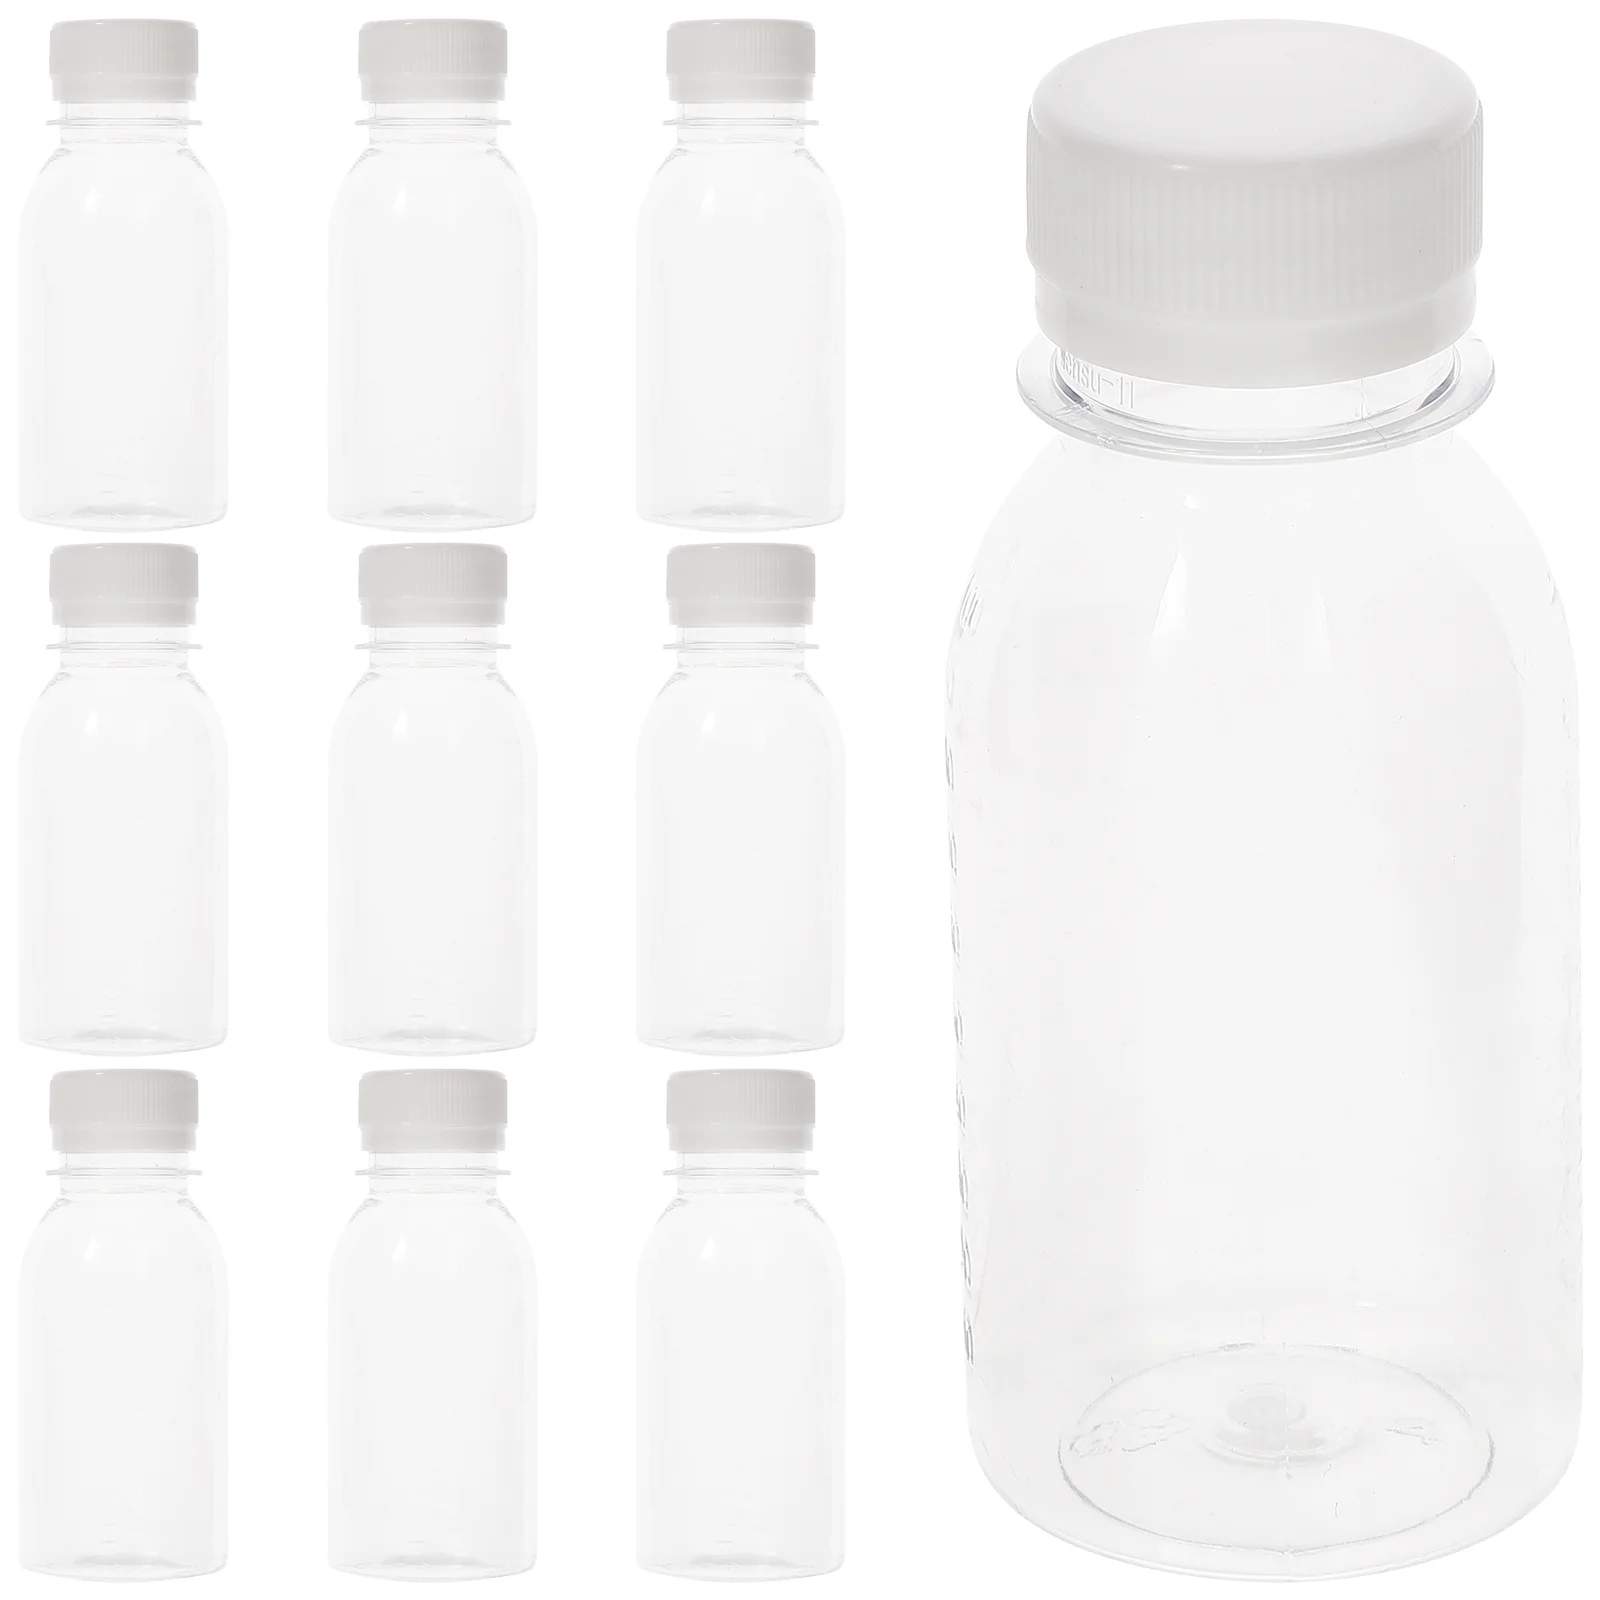 

Bottles Bottle Reusable Water Smoothie Empty Dressing Box Cup Shot Ginger Clear Salad Plastic Containers Beverage Caps Drink